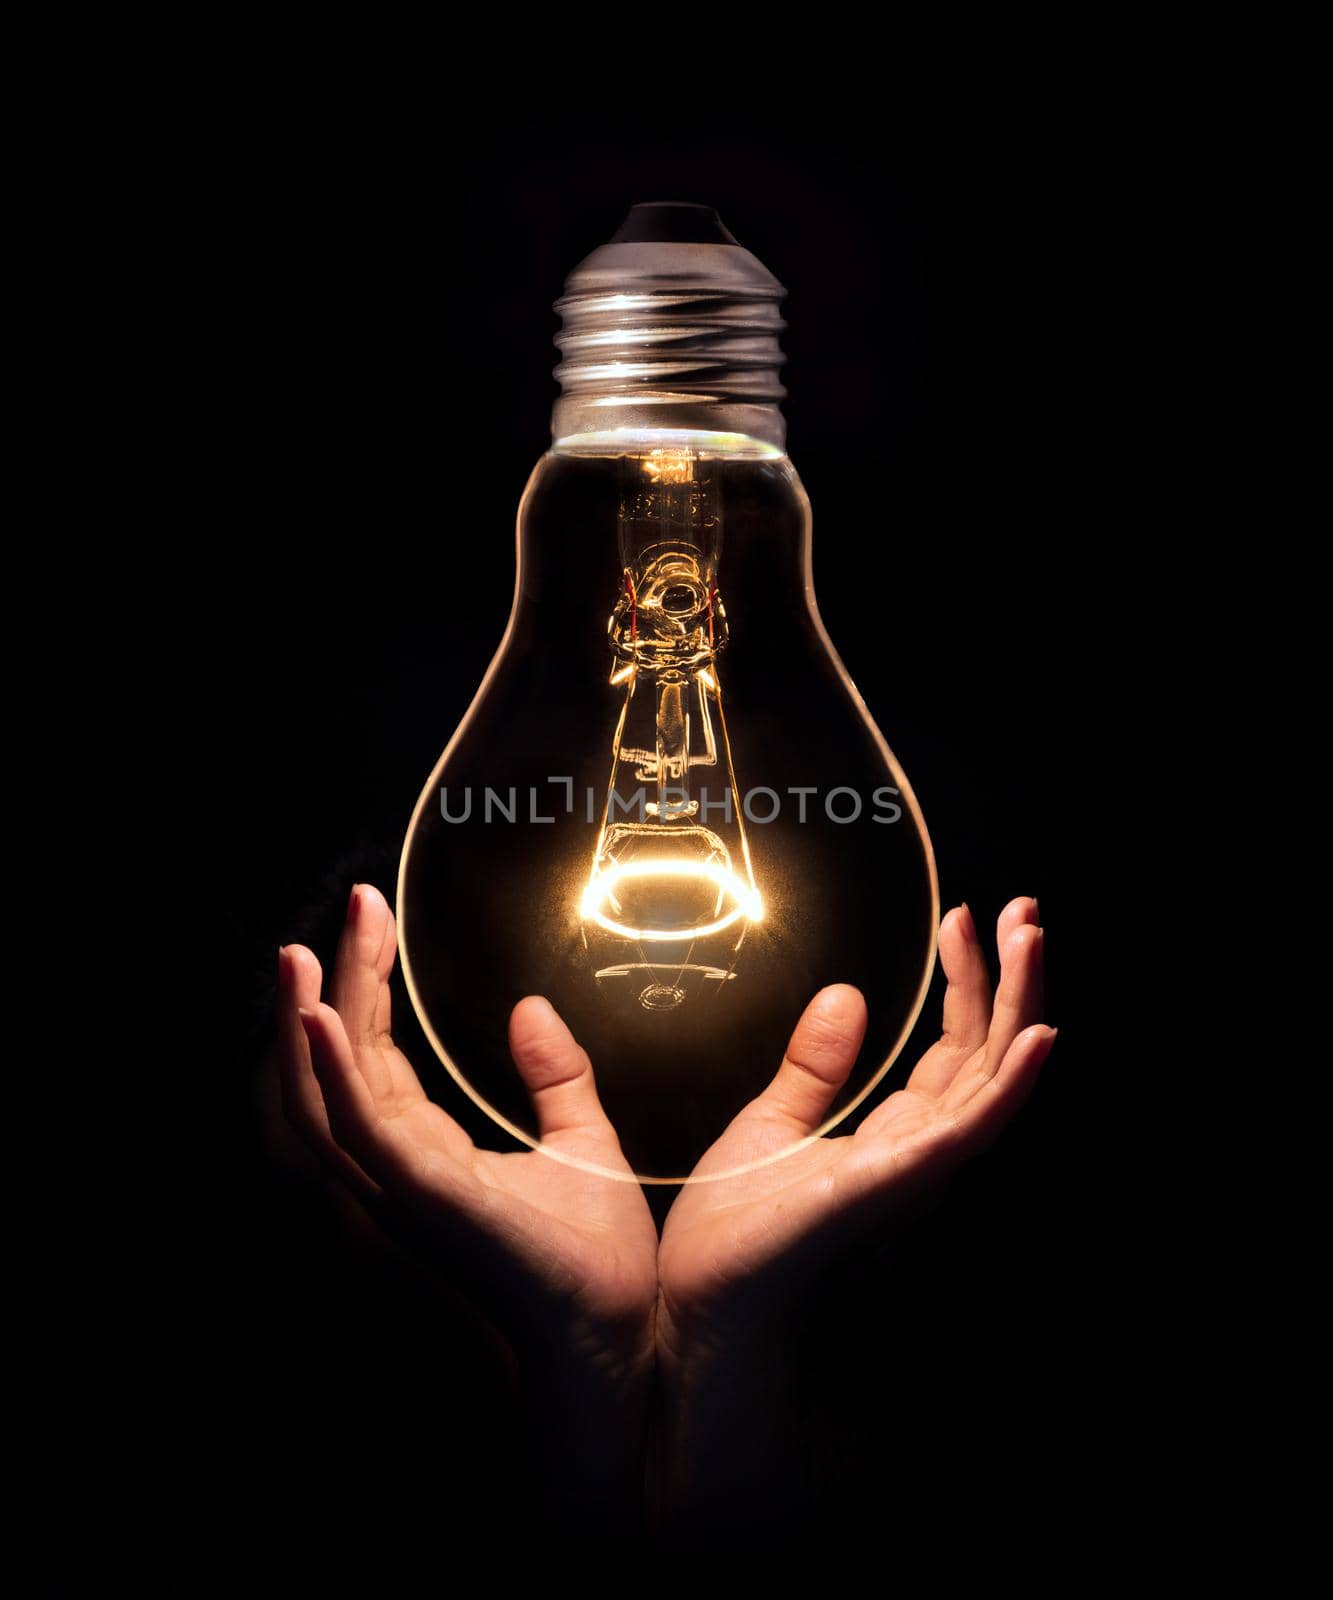 Lightbulb on hand isolate on black background.Energy or idea concept by thanumporn